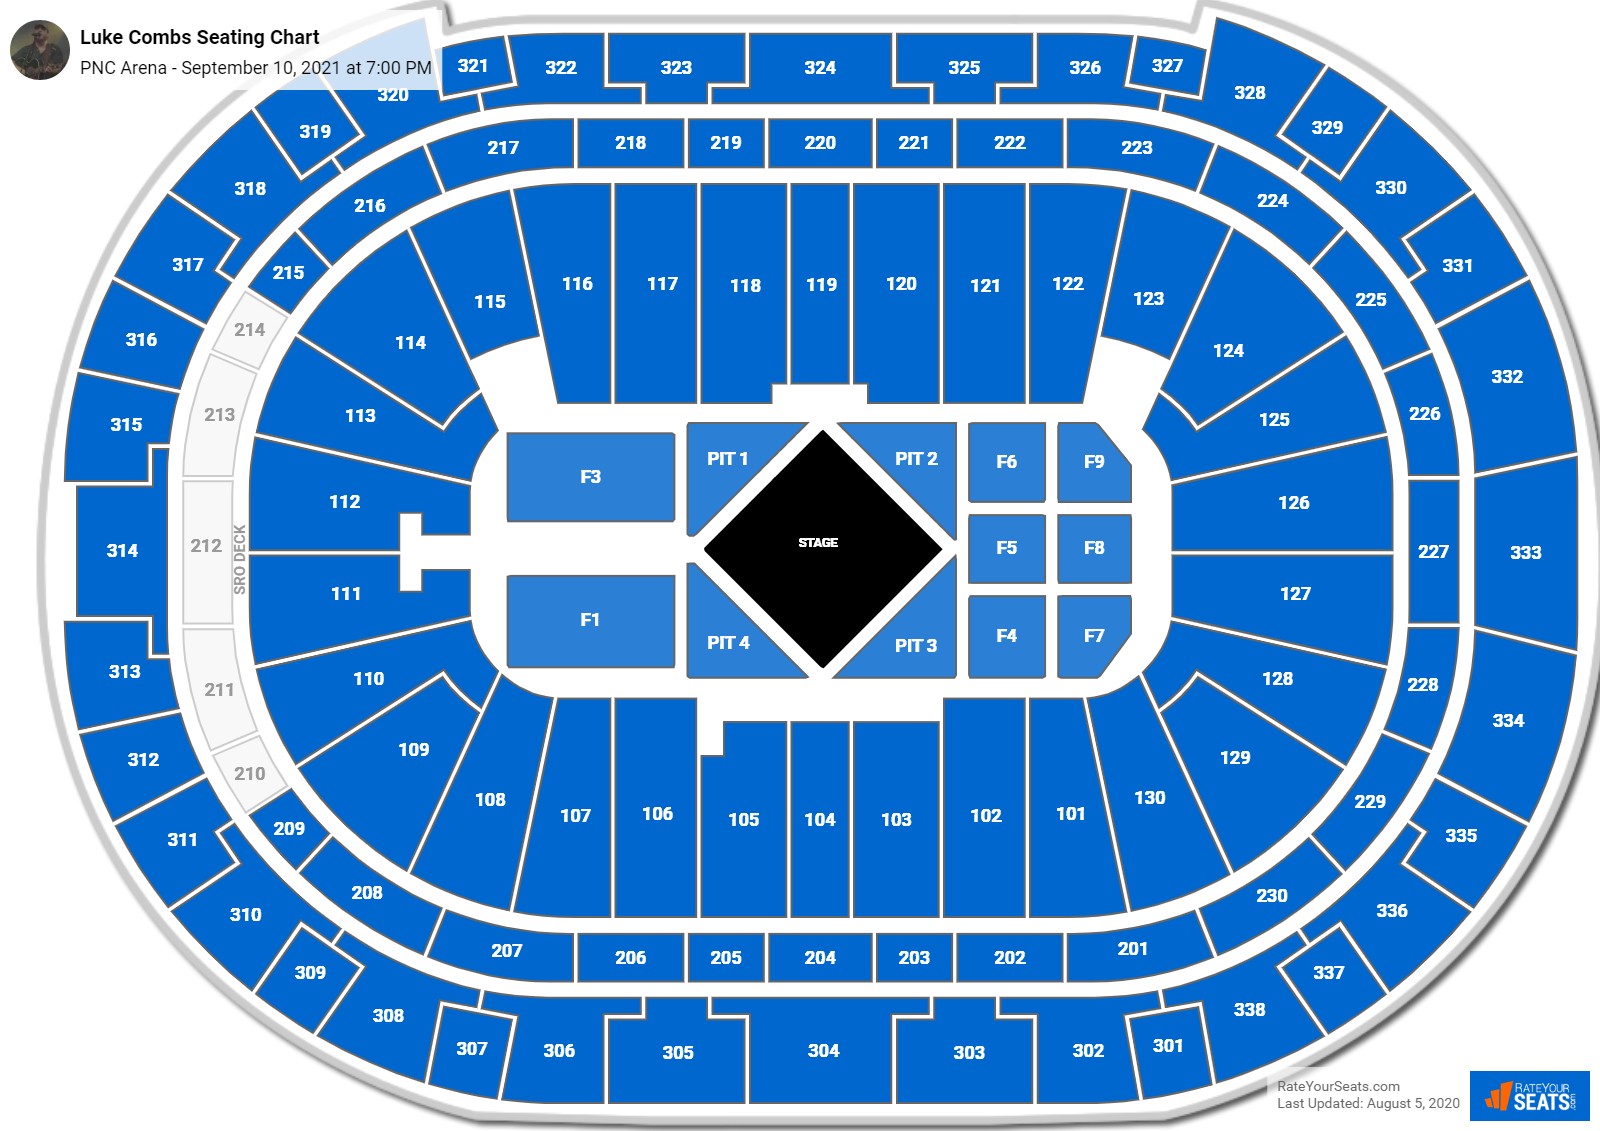 Pnc Arena Seating Charts For Concerts Rateyourseats Com. rocksino venue sea...